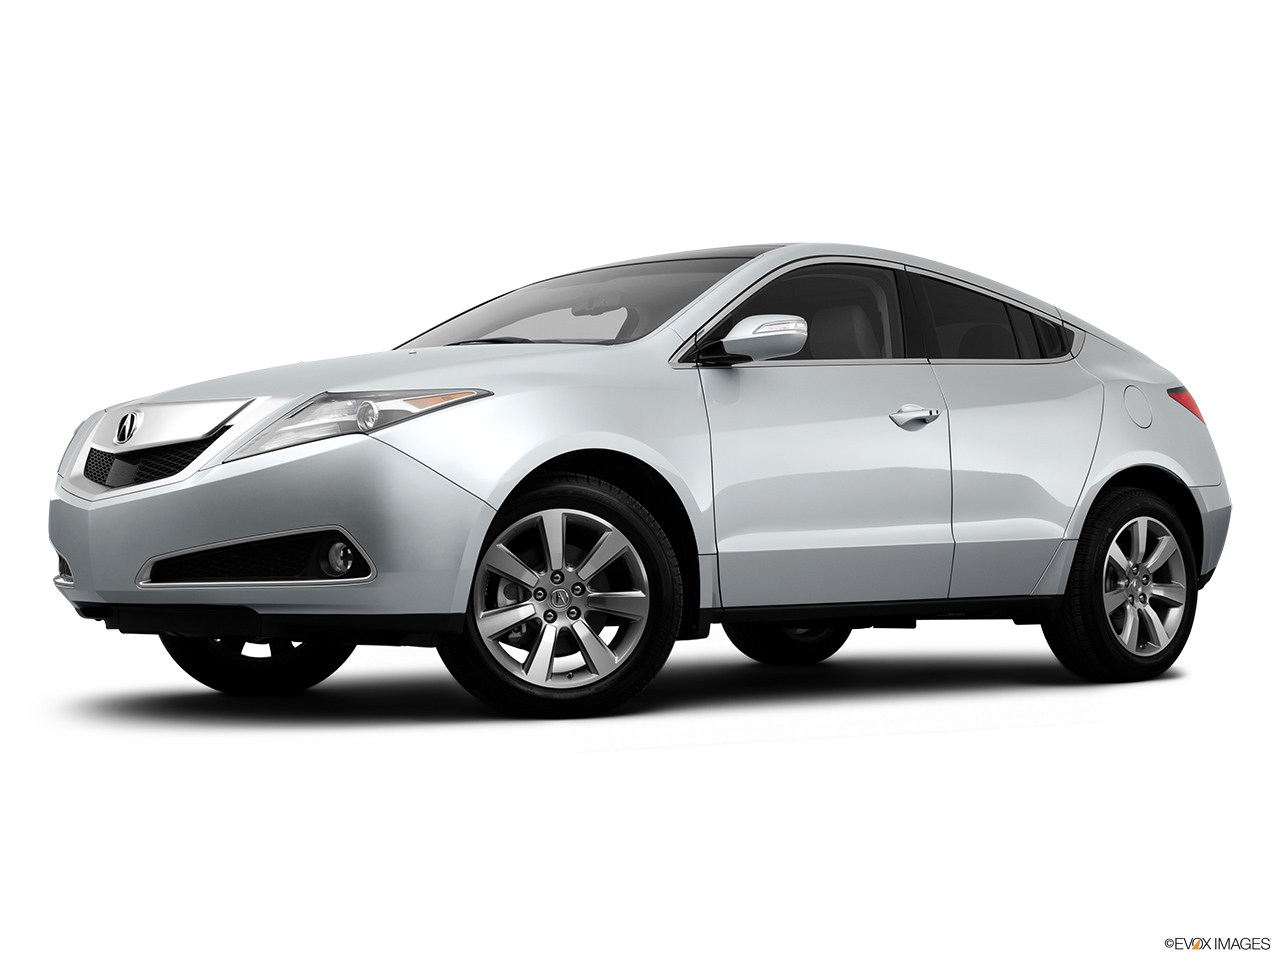 2011 Acura ZDX ZDX Advance Low/wide front 5/8. 